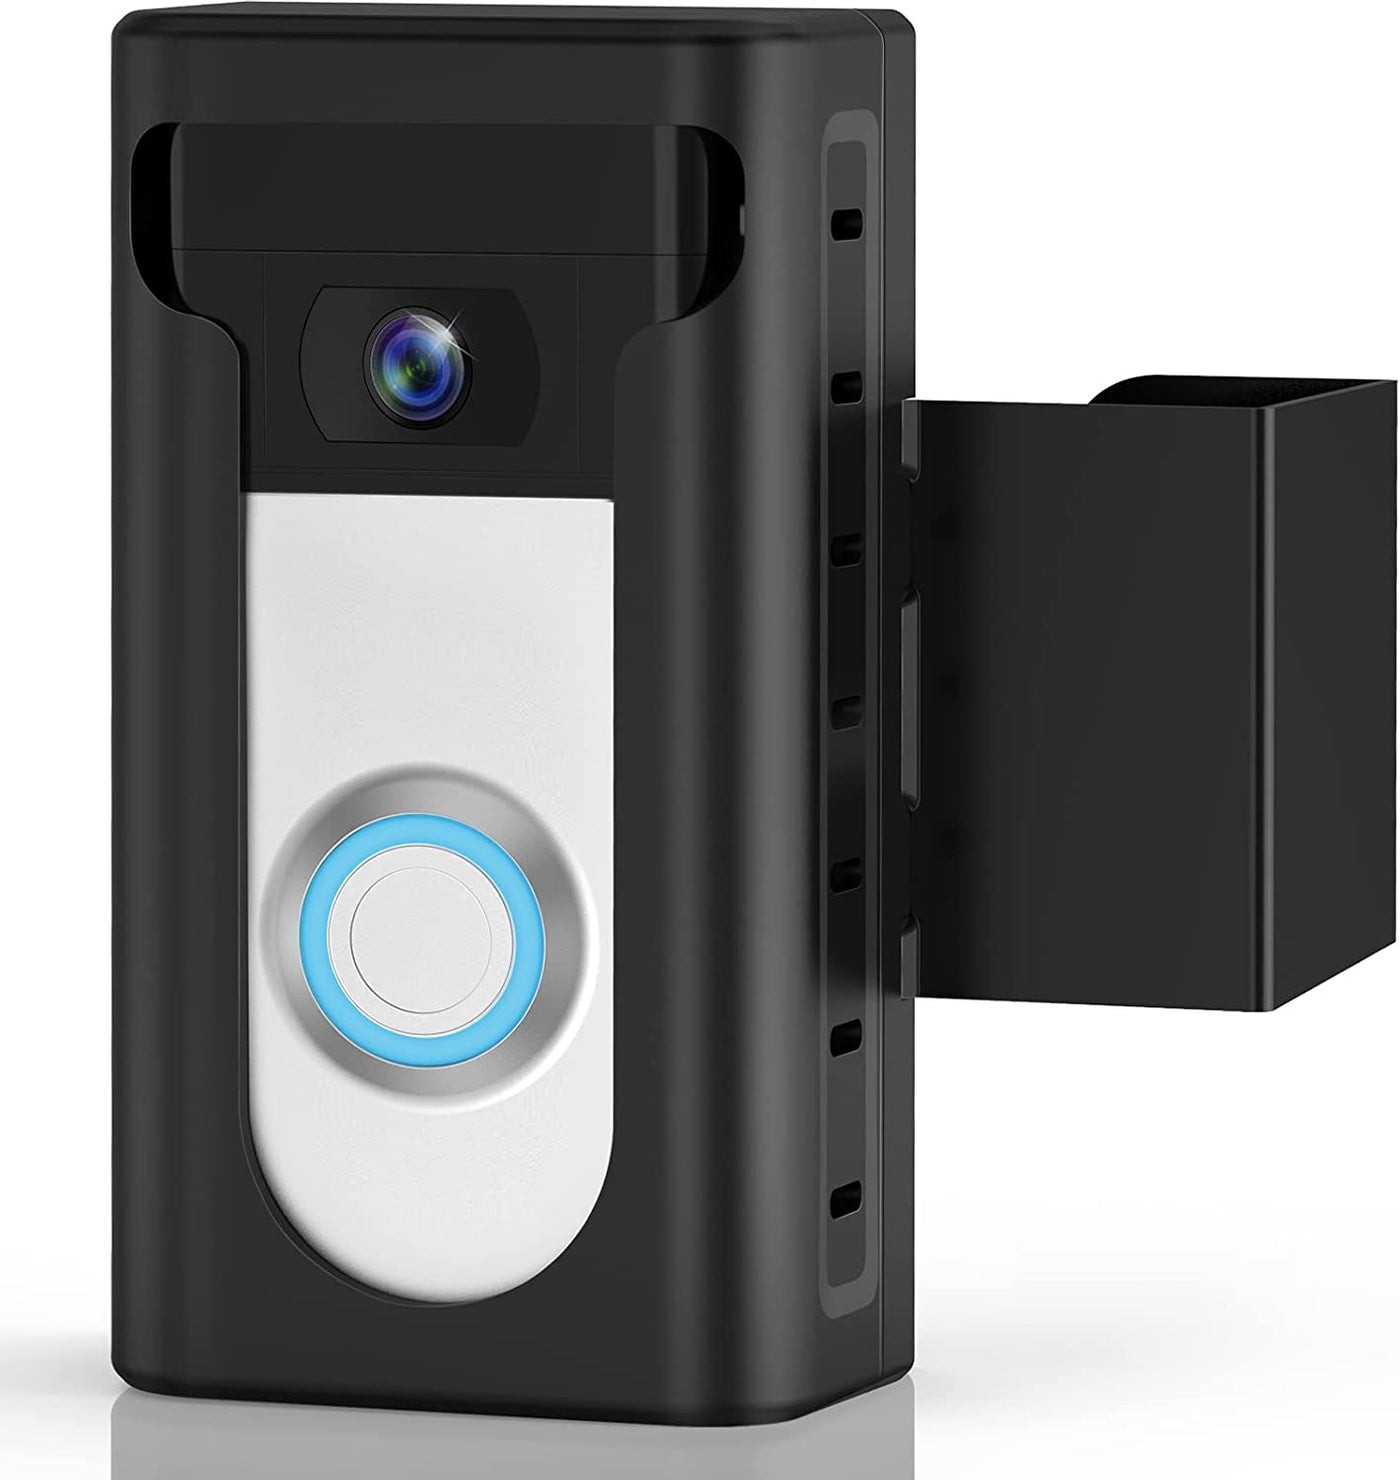 Anti-Theft Video Doorbell Mount Compatible with Video